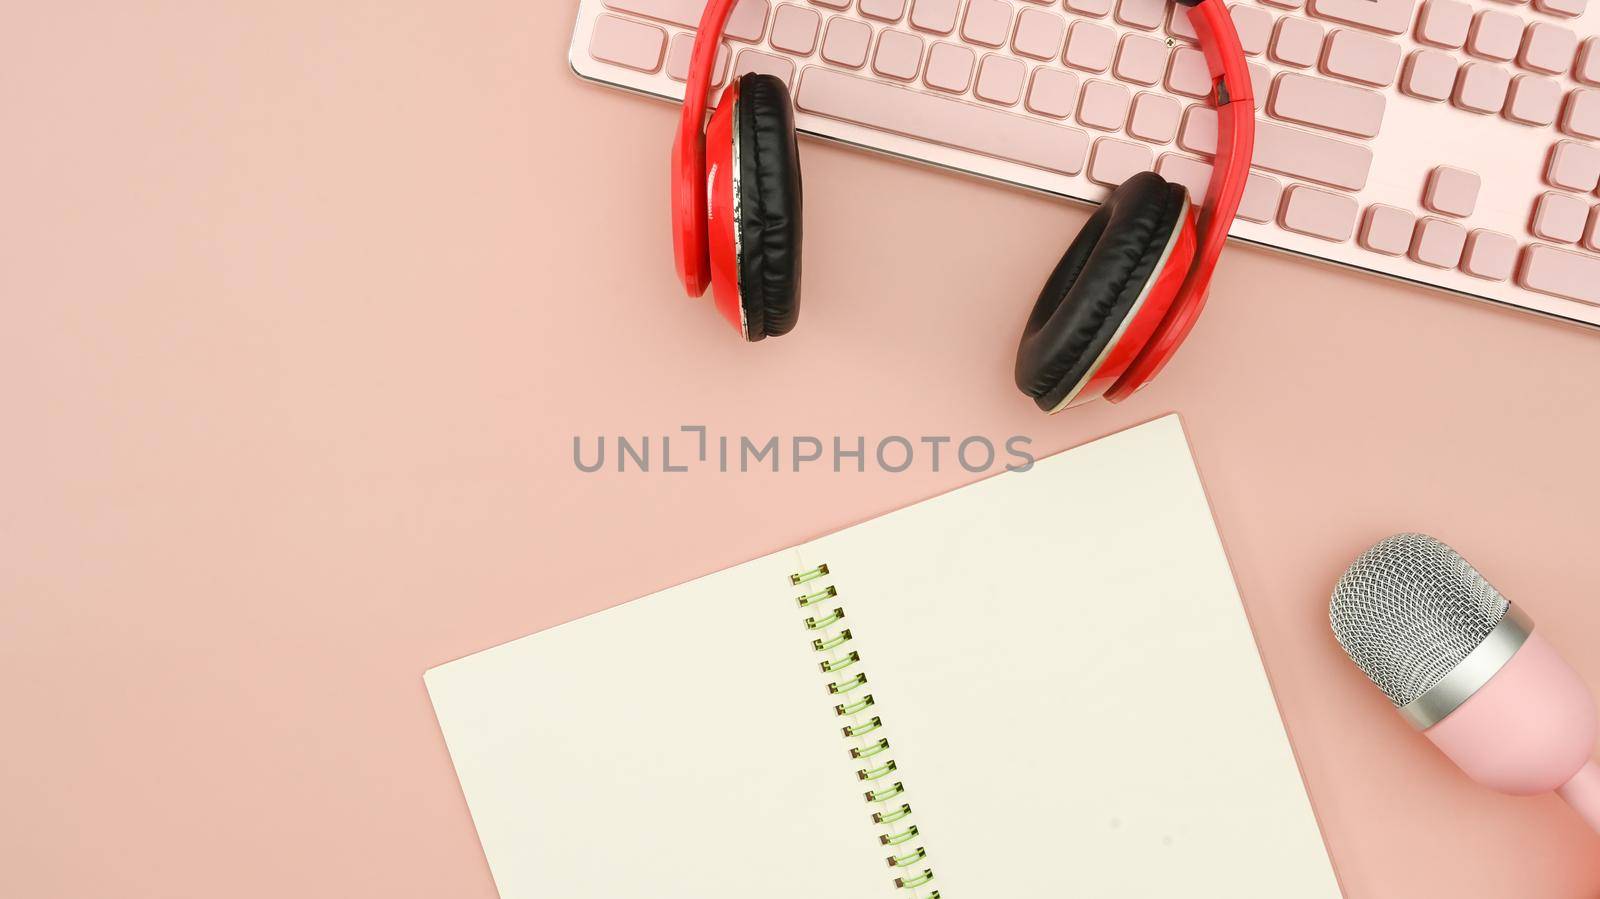 Red wireless headphones, microphone and notepad on pink background. Technology and audio equipment concept.